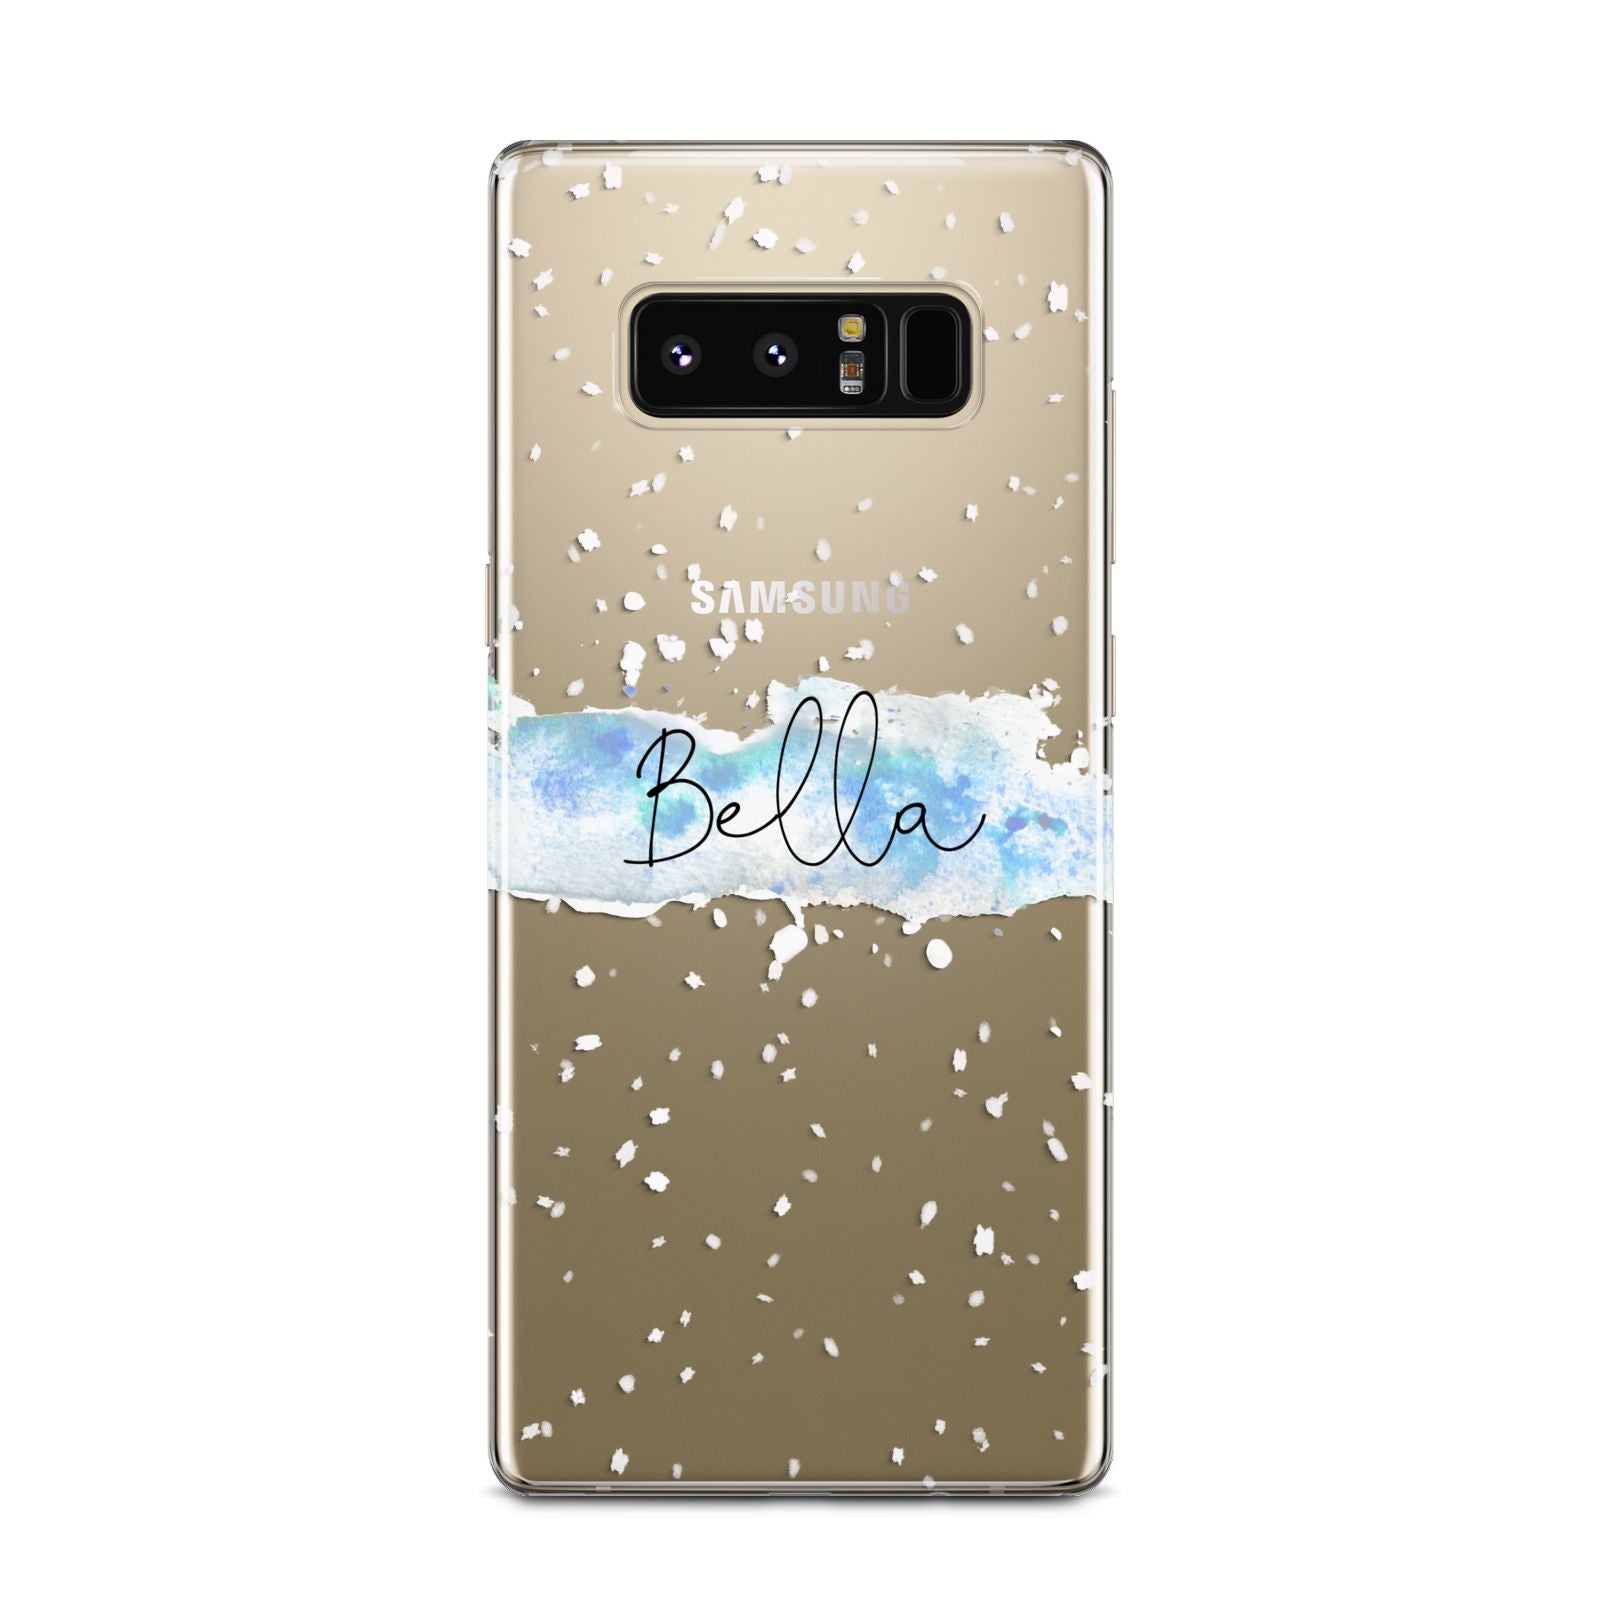 Personalised Christmas Snow fall Samsung Galaxy Note 8 Case